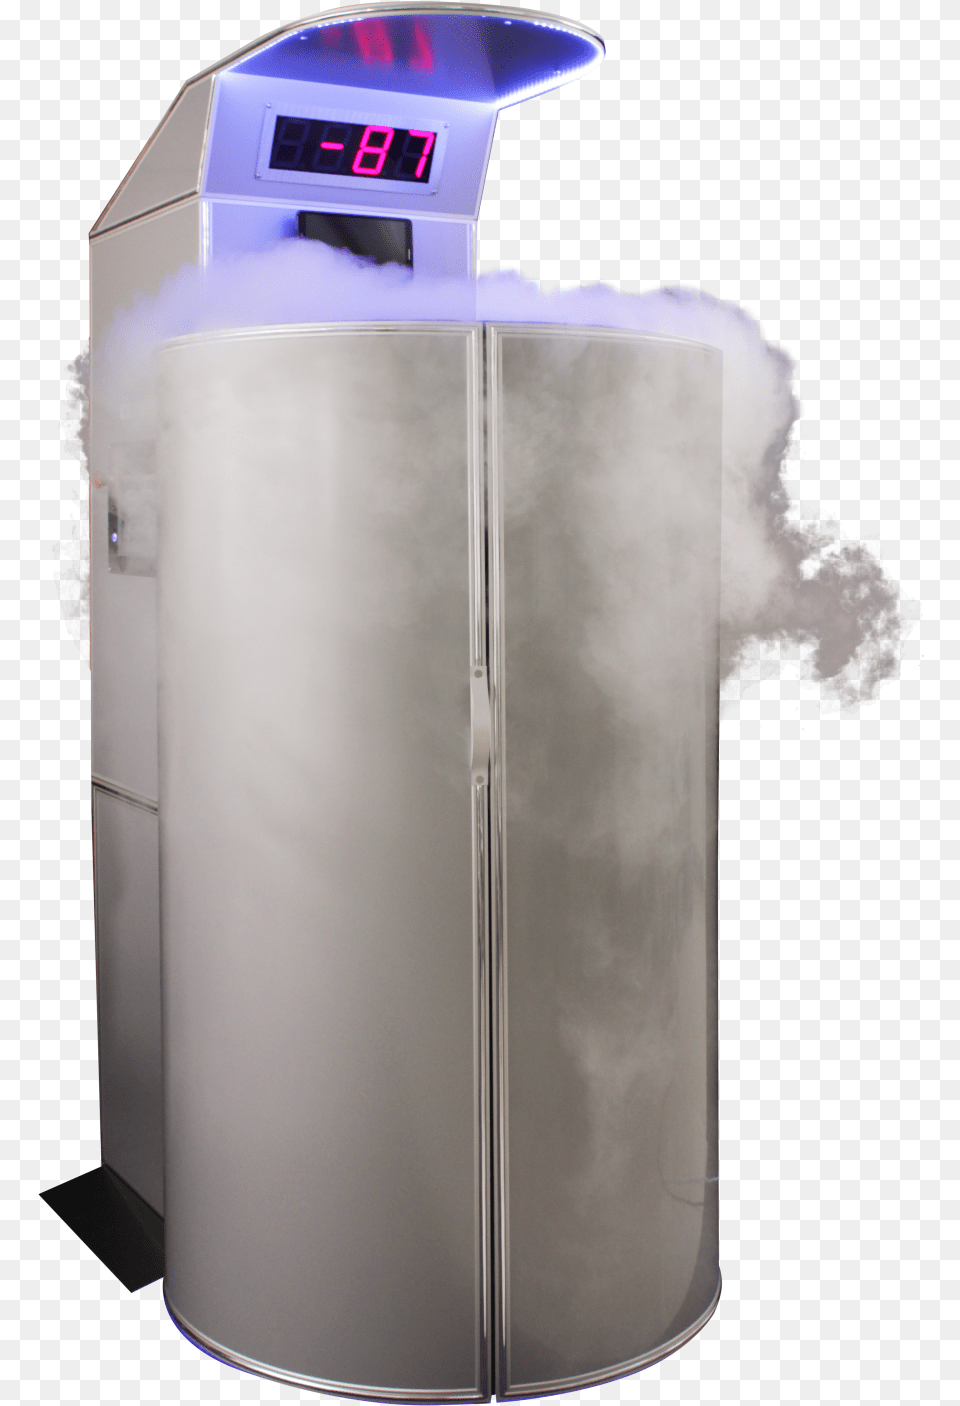 Refrigerator, Device, Appliance, Electrical Device Png Image